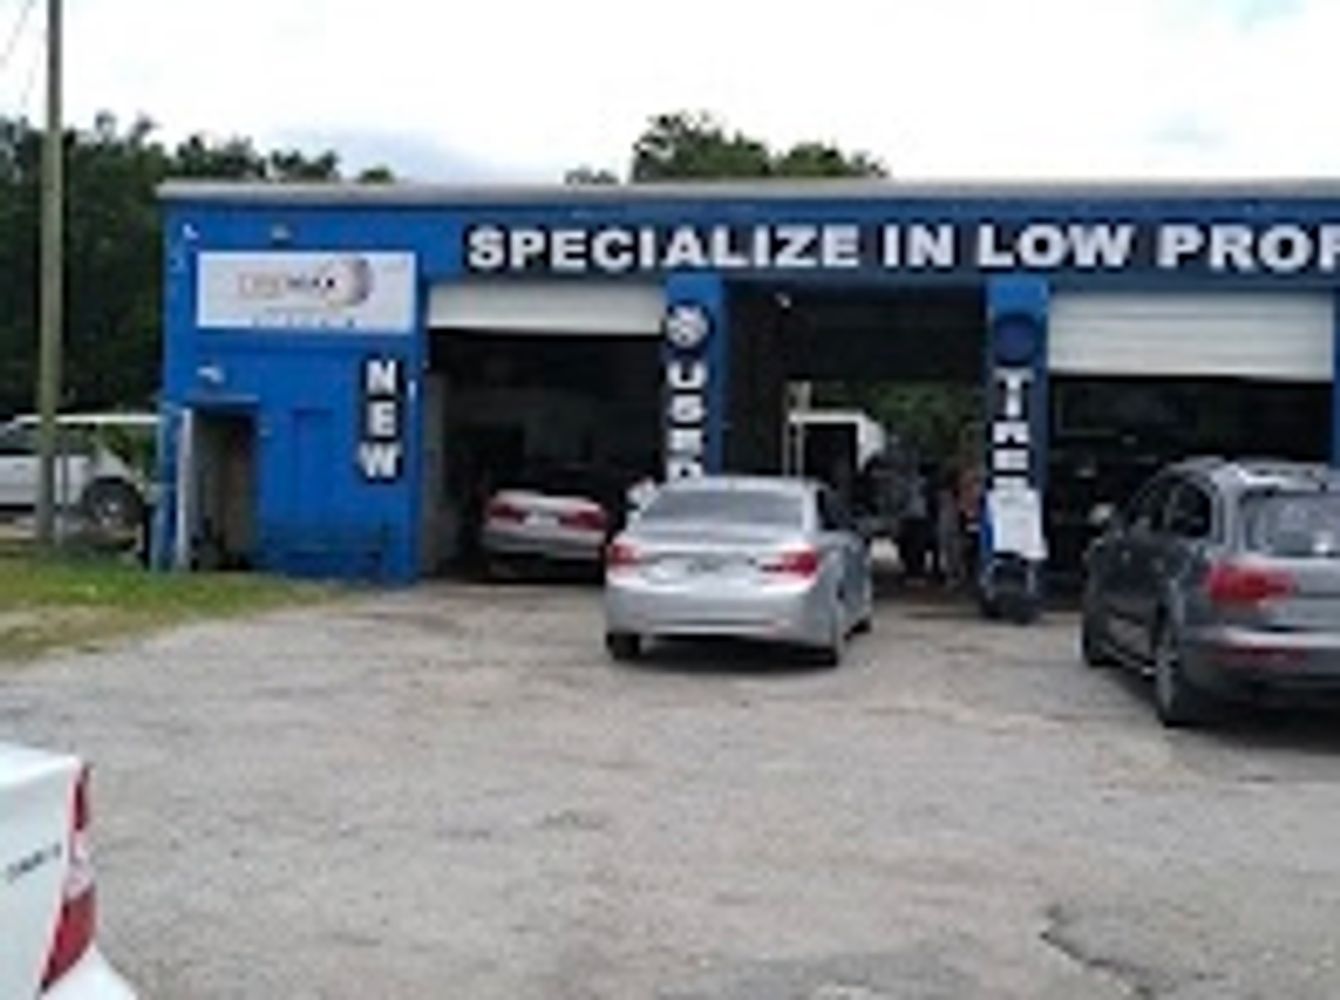 Tire Shop Located on 363 S Ivey Lane Rd Orlando Florida 32879, 32819, 3281.